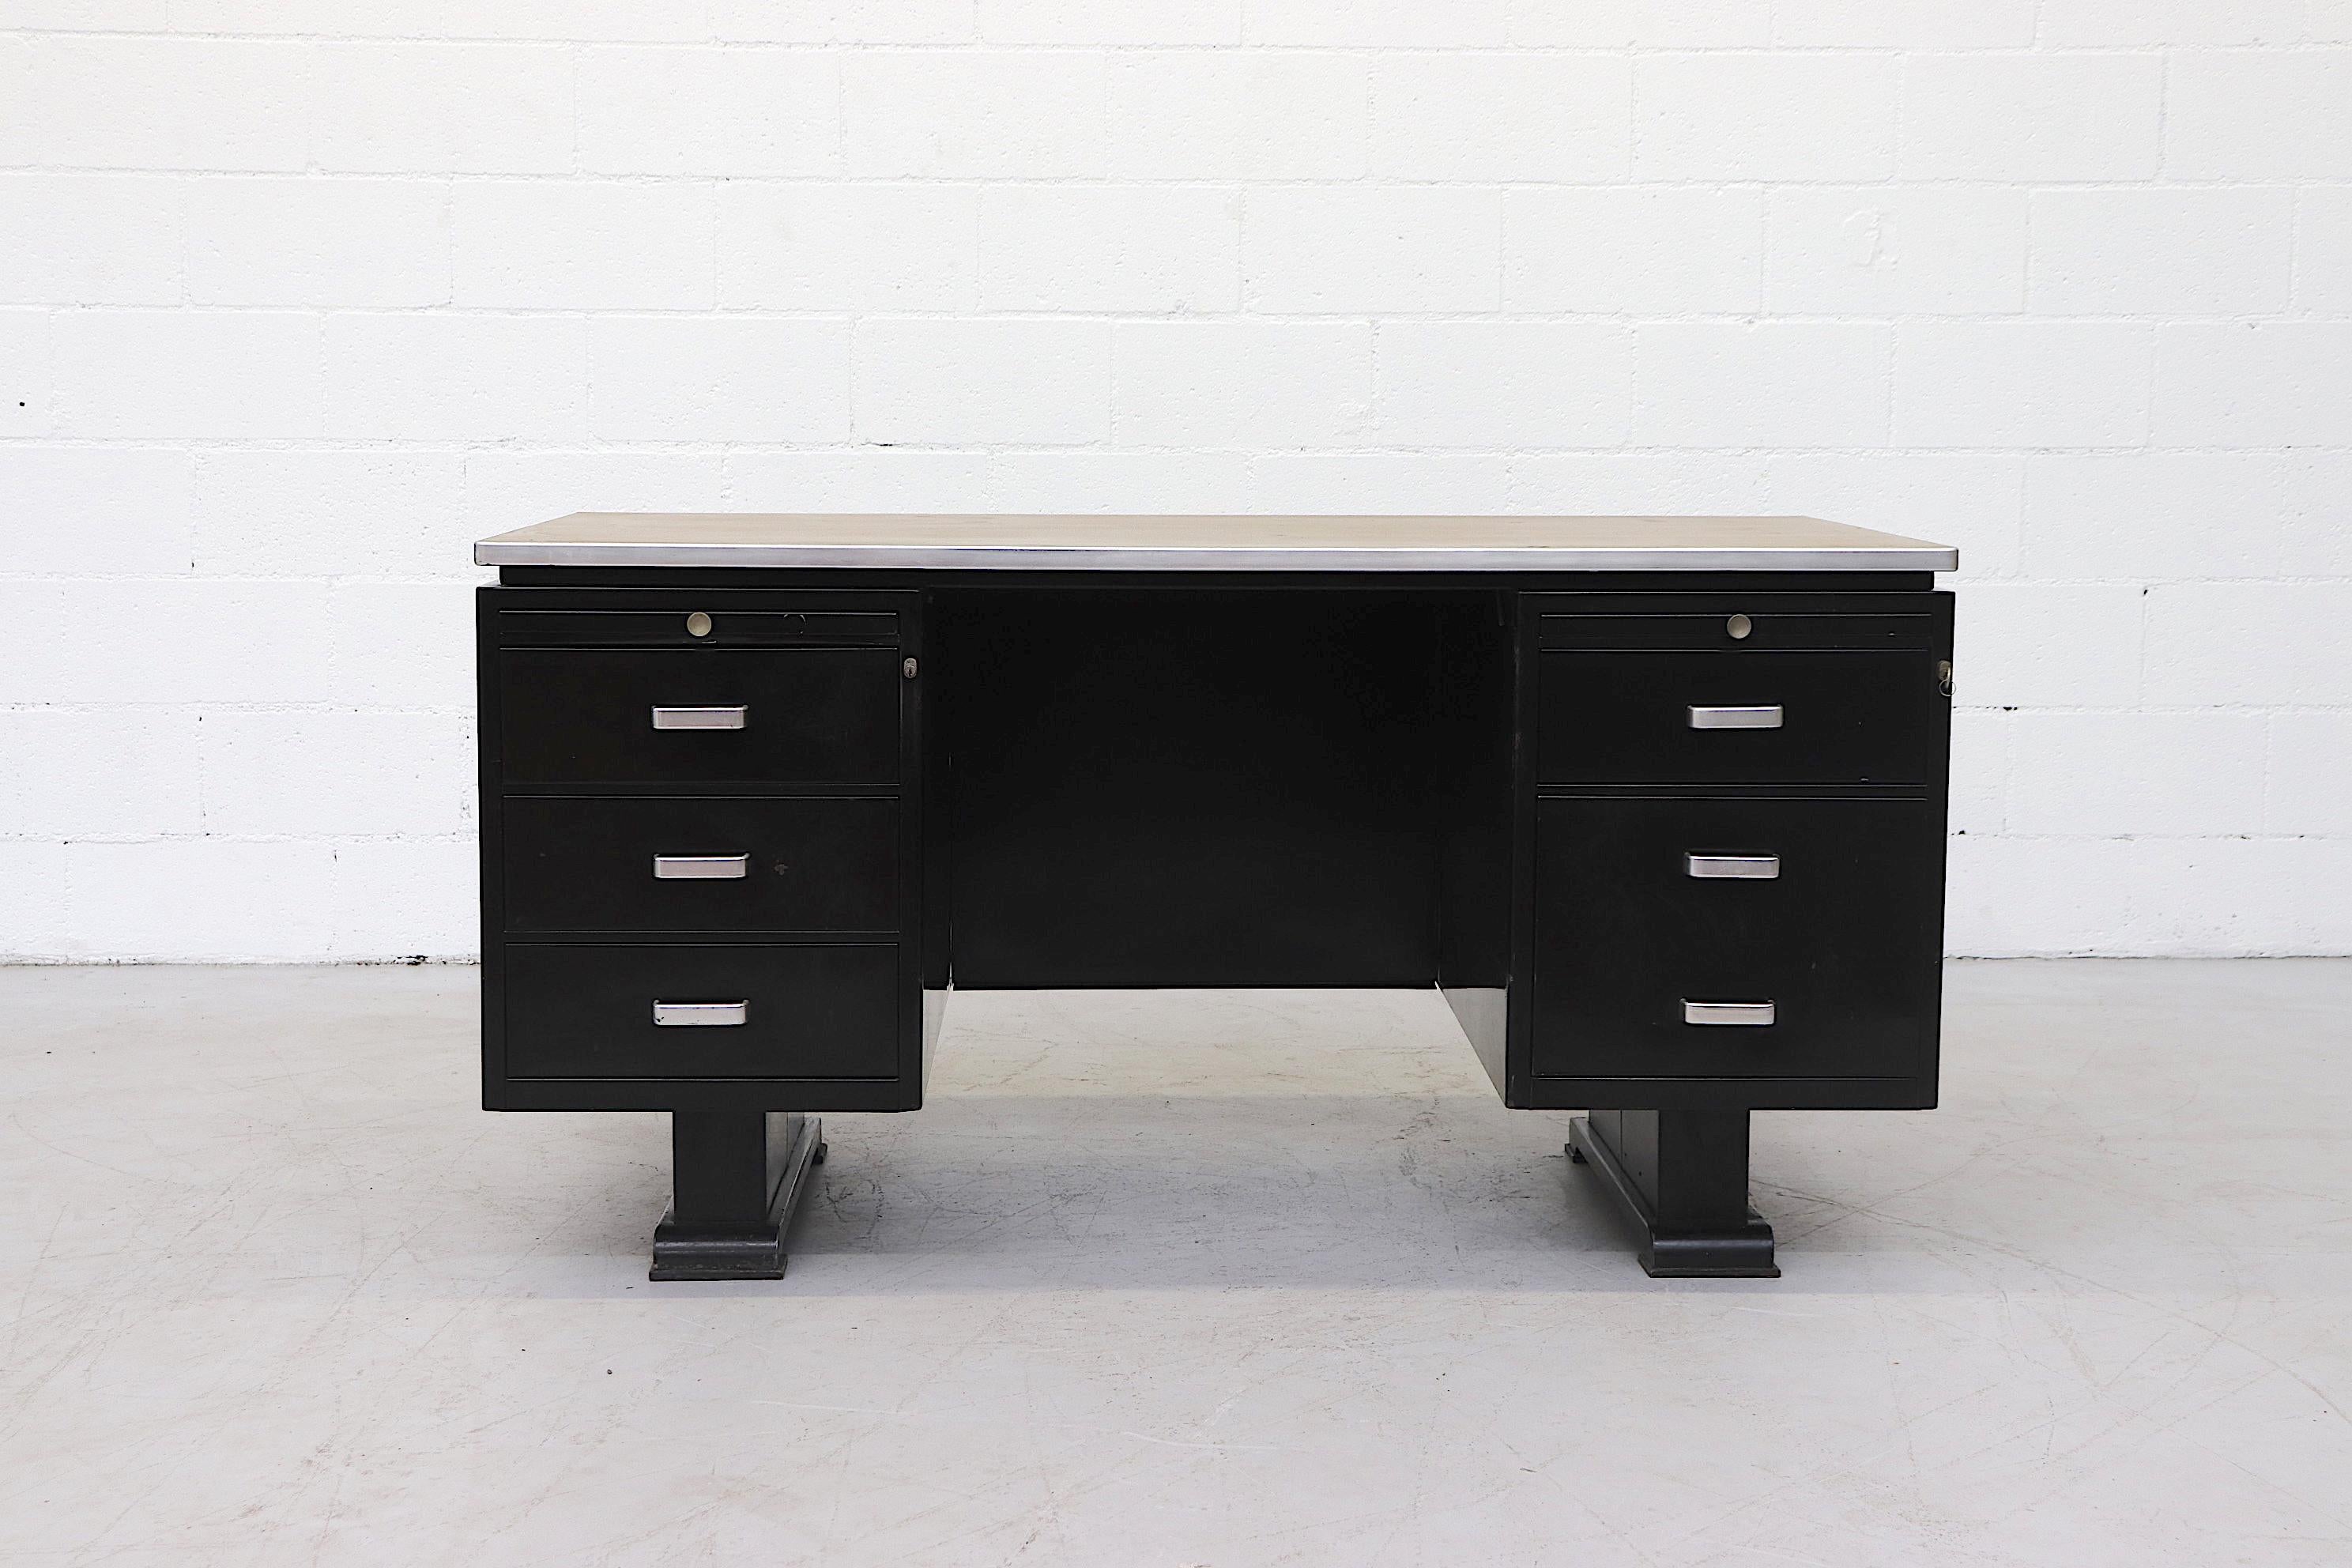 Vintage large black enameled industrial desk by Van Blerk Tilburg, with tan linoleum top and 6 drawers. Executive style desk with built in document trays and aluminum handles. In very original condition with visible scratches and dents consistent